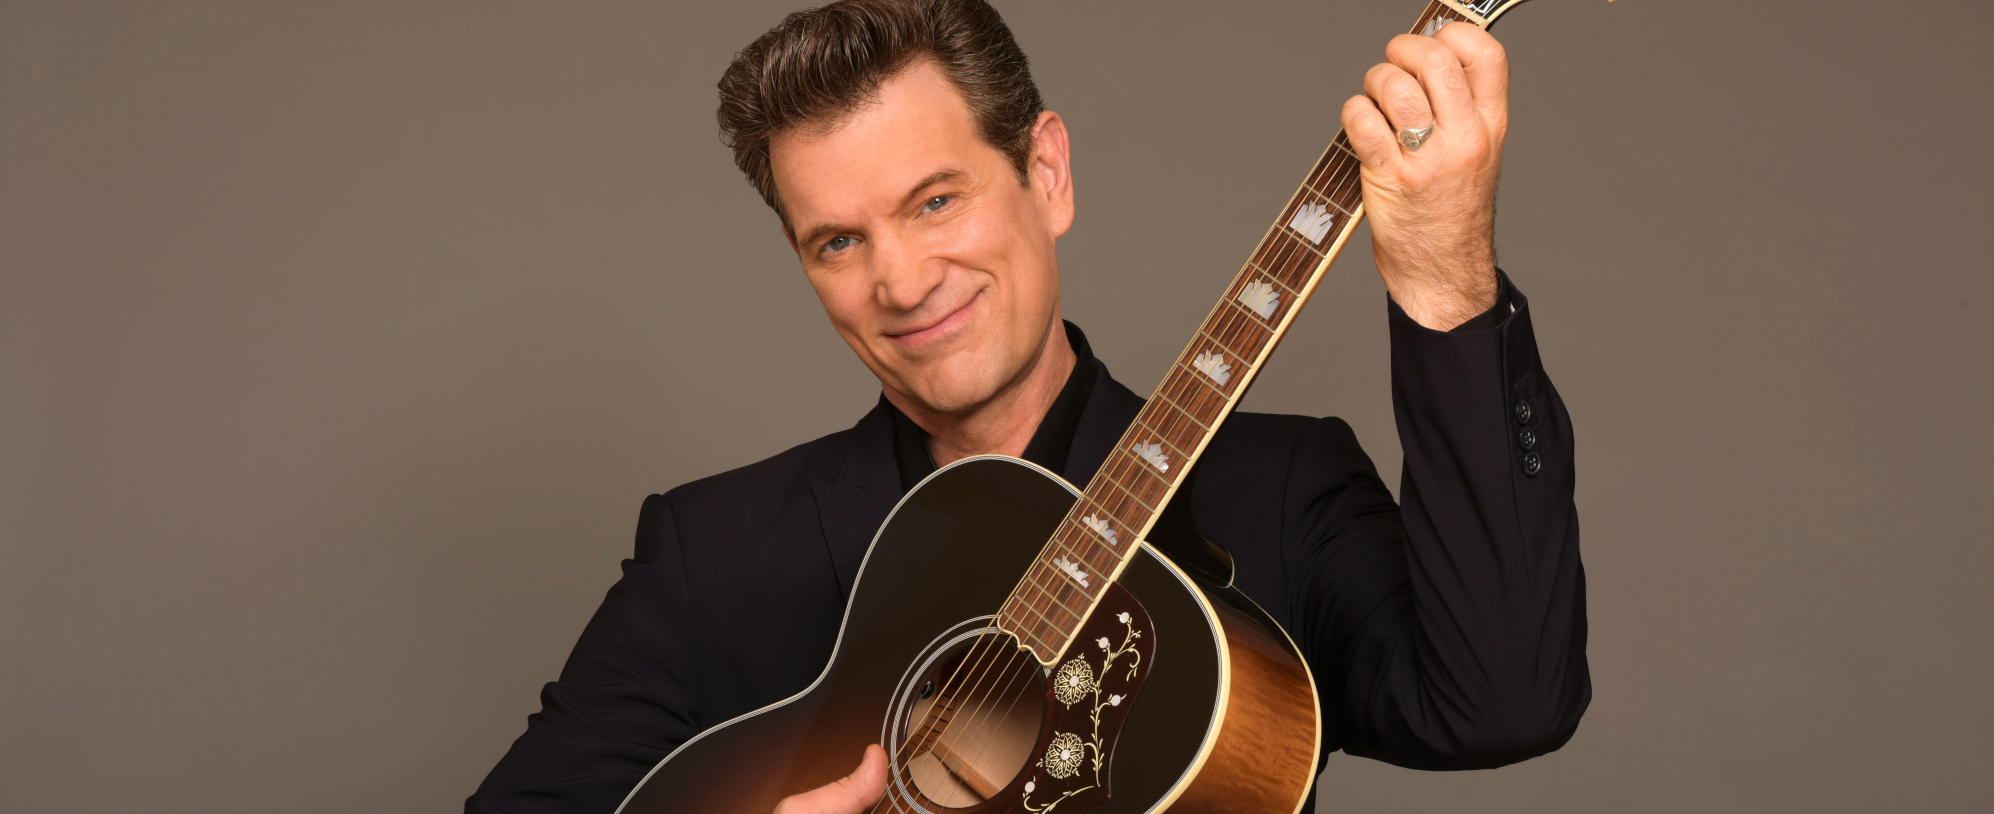 Chris Isaak is Ready for More Music